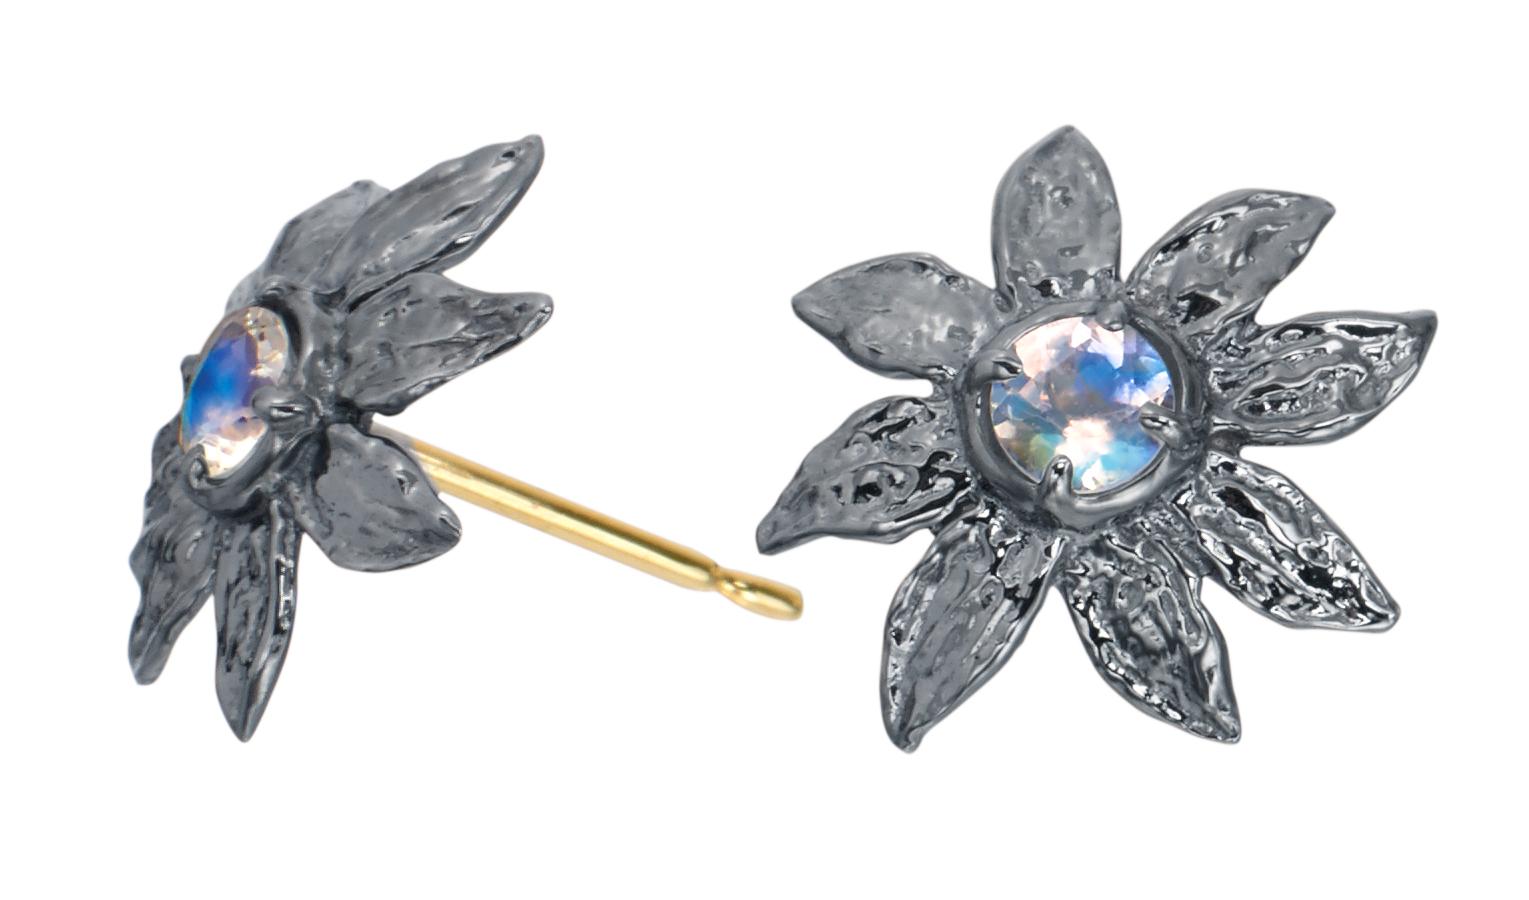 Round Cut Sterling Silver Flower Stud Earrings with Moonstones with 14 Karat Gold Post For Sale